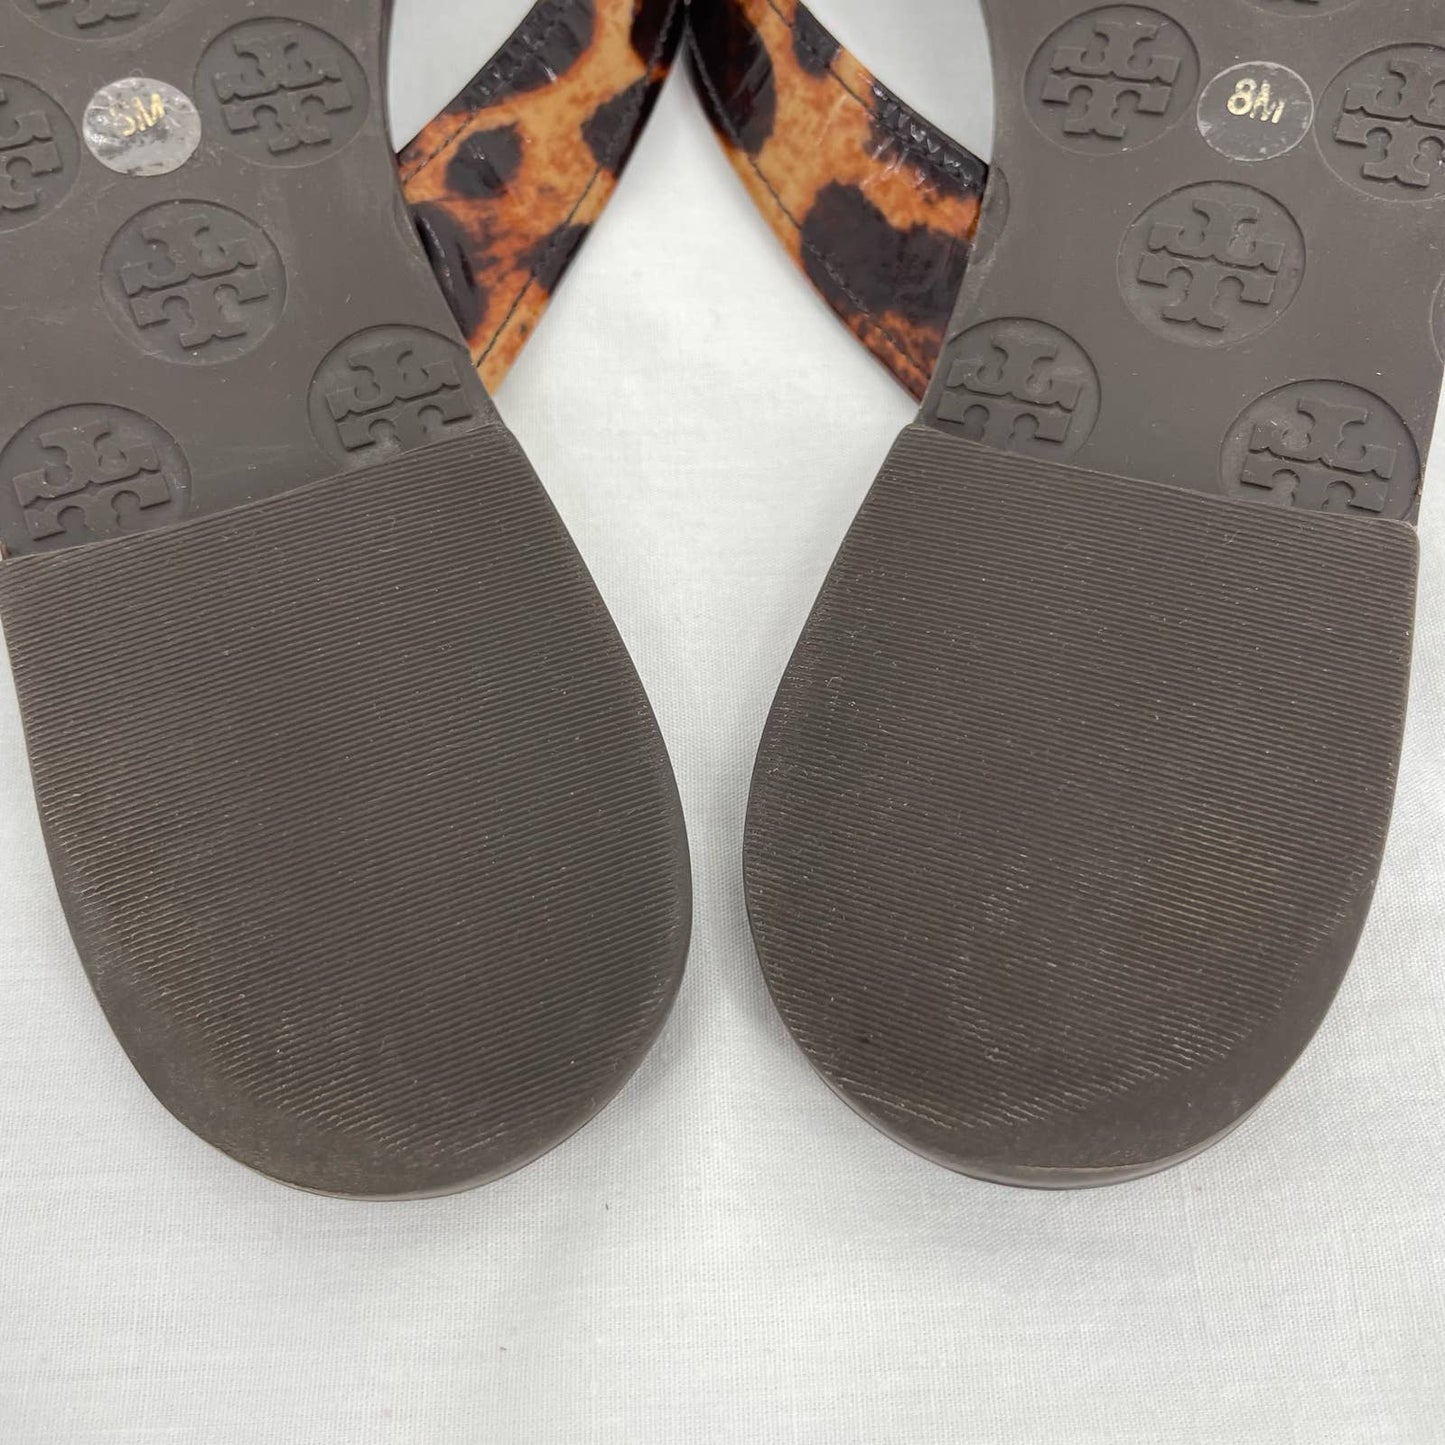 Tory Burch Thora Leopard Patent Brown Summer Thong Sandals Logo Animal Print Size 8